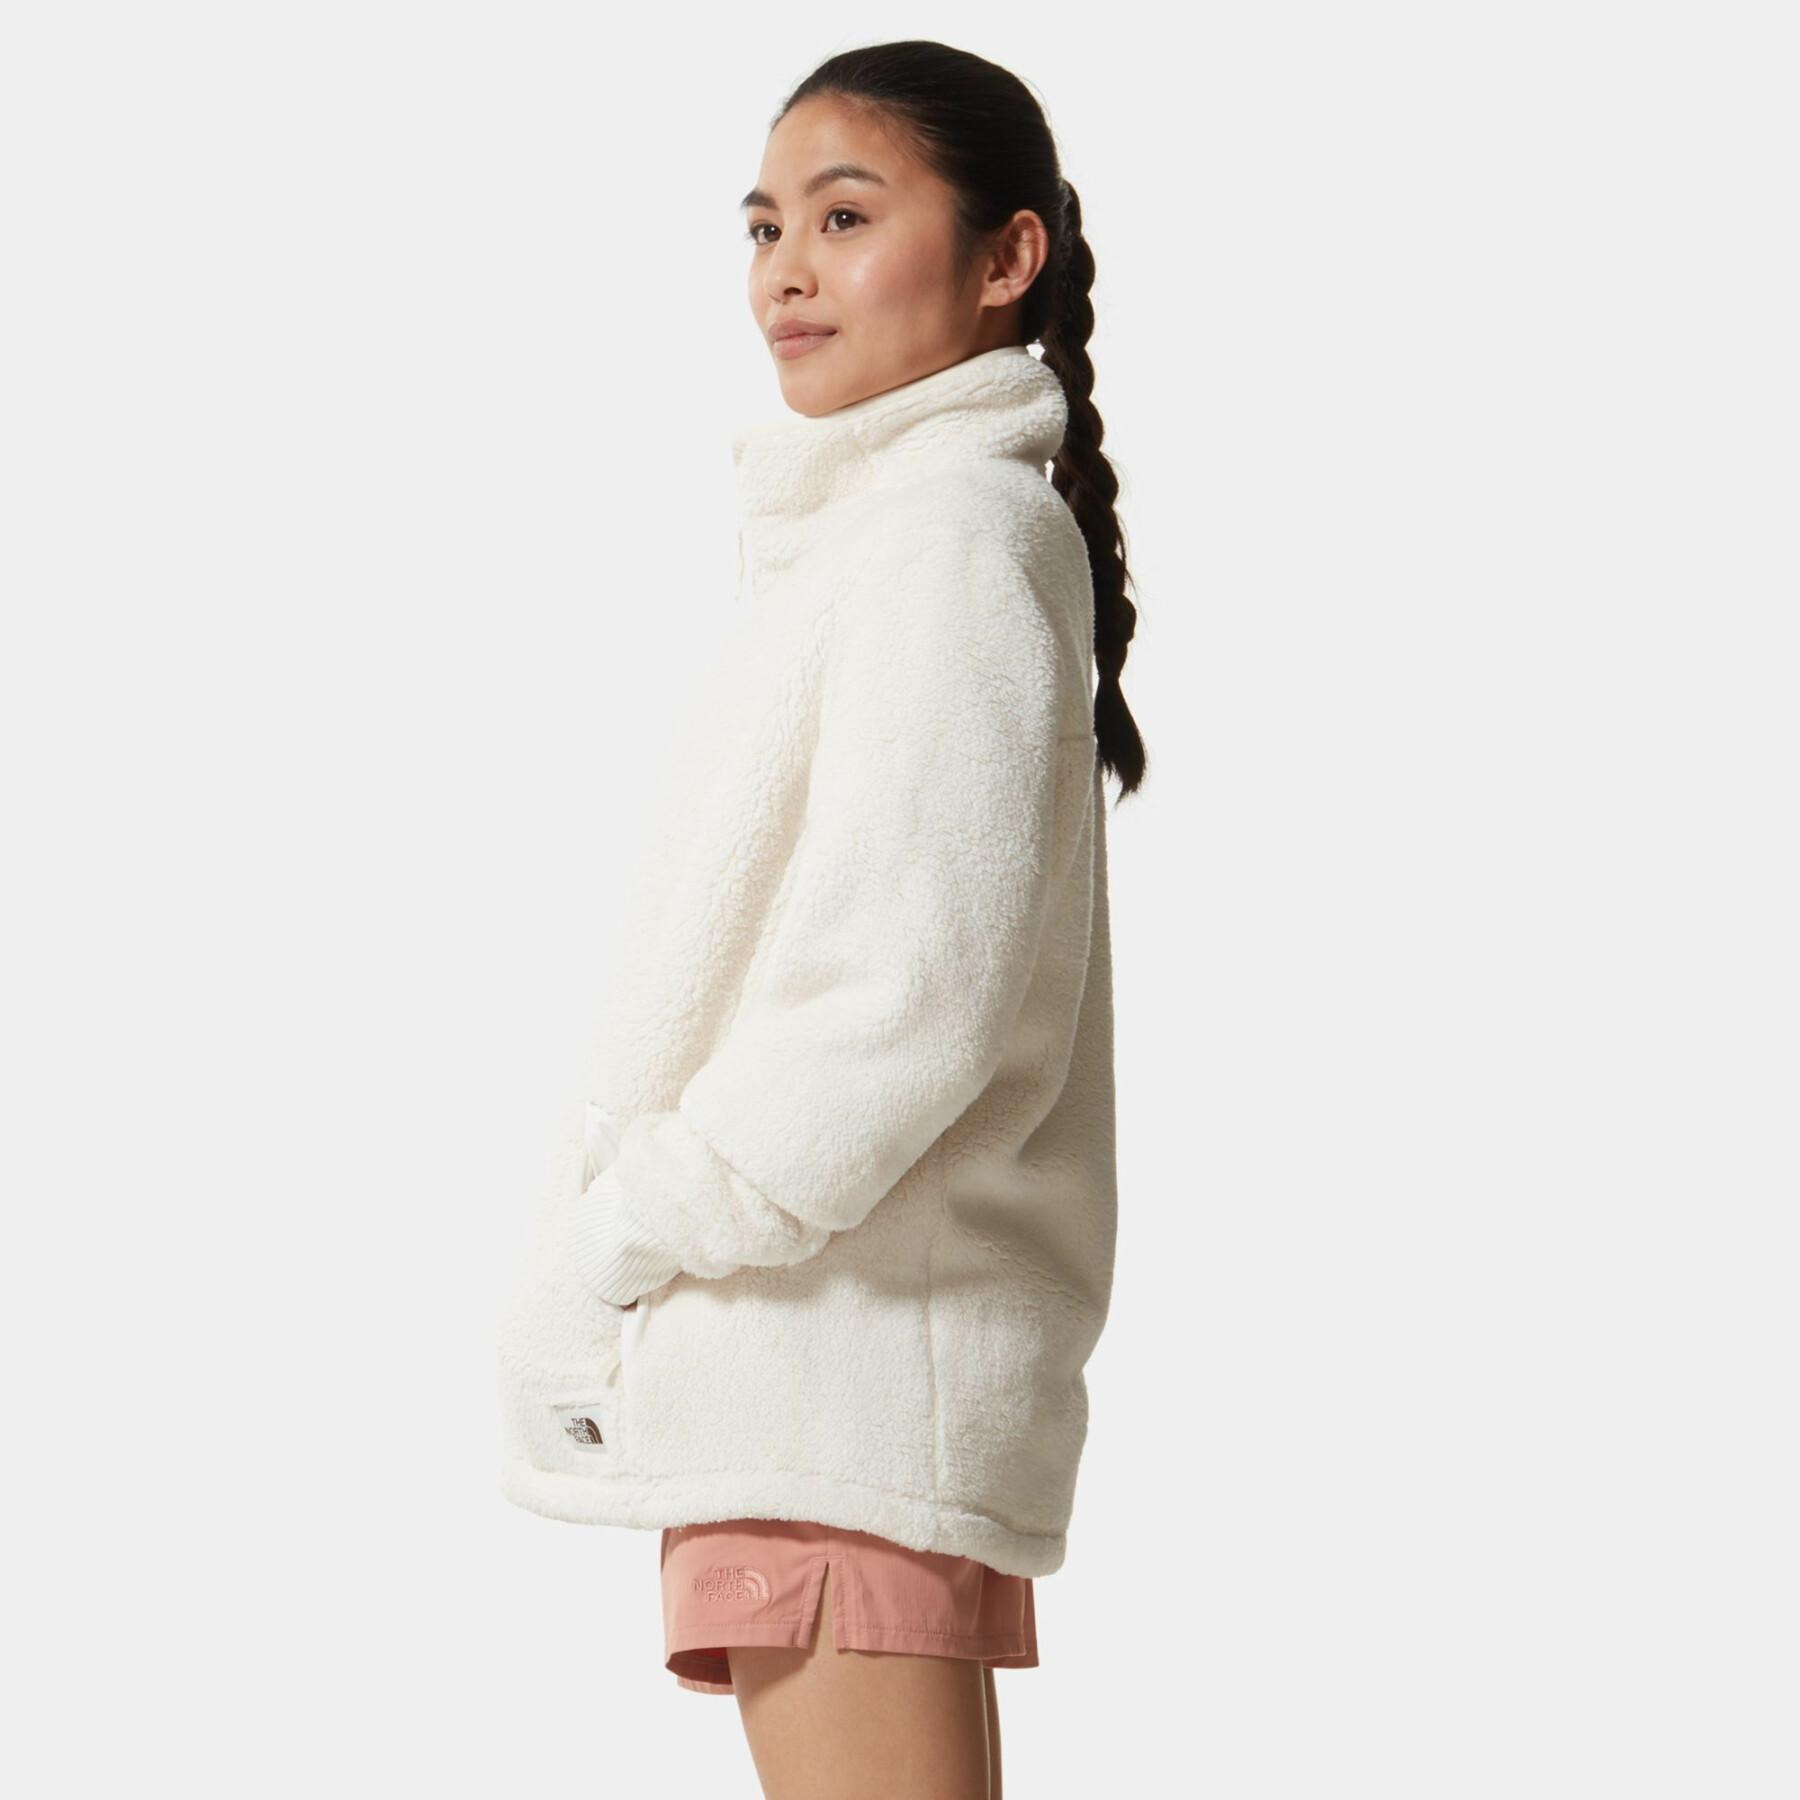 Women's fleece The North Face Campshire